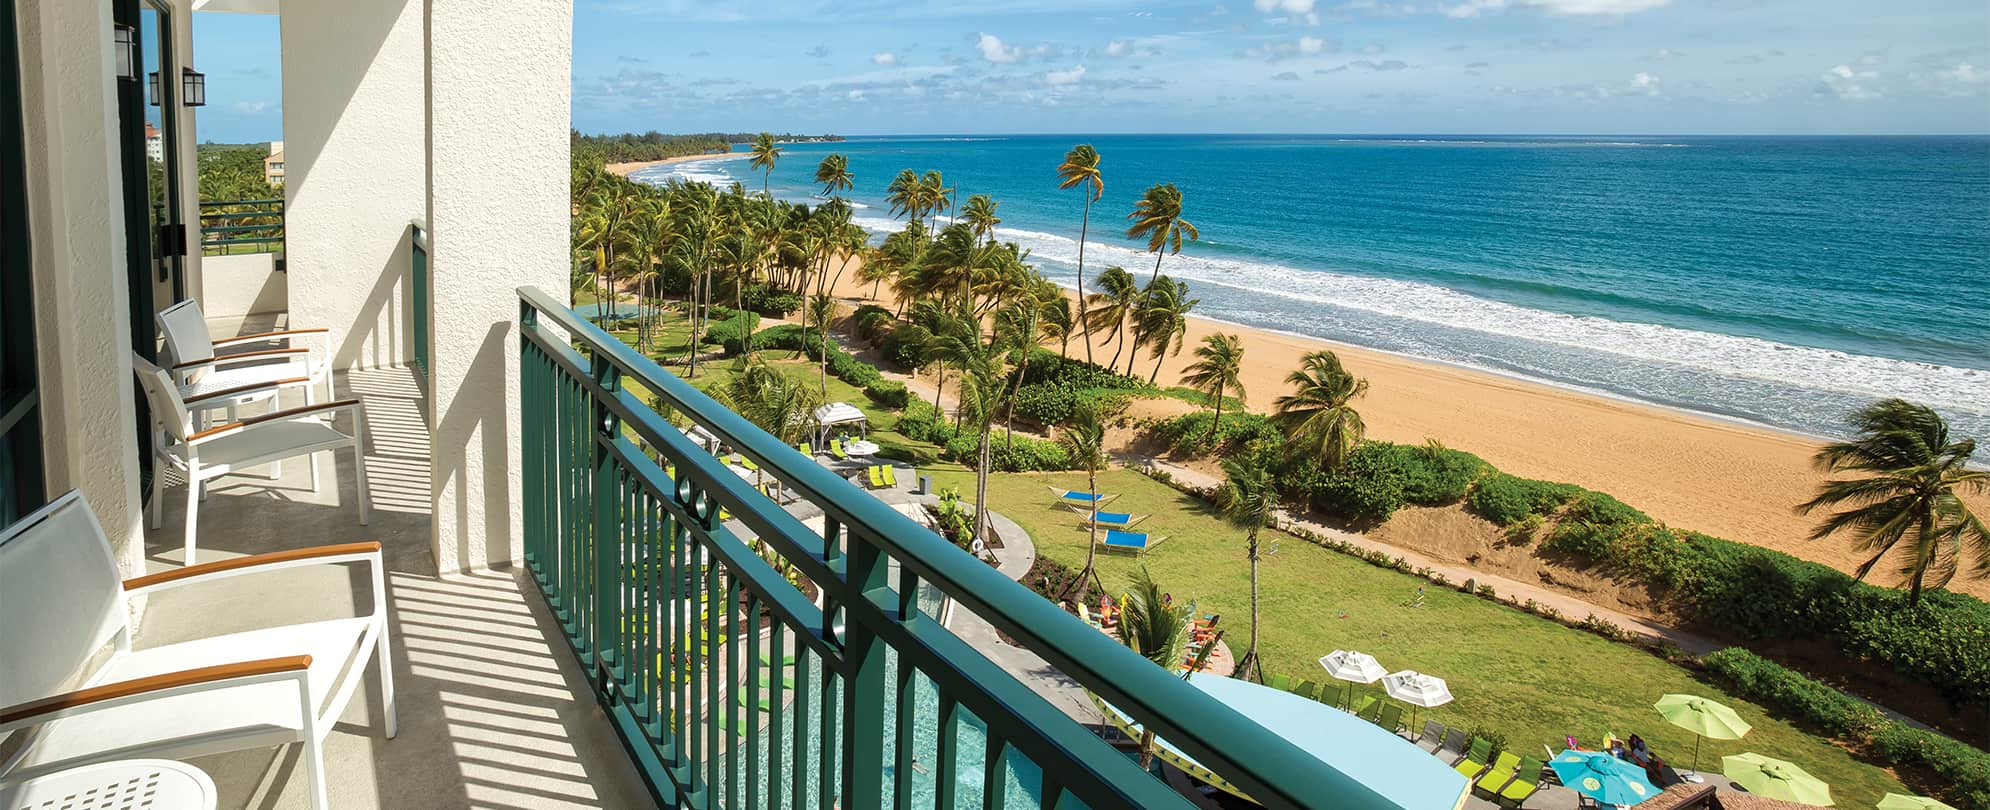 A view of the ocean and pool from a balcony at Margaritaville Vacation Club by Wyndham - Rio Mar, a timeshare resort.